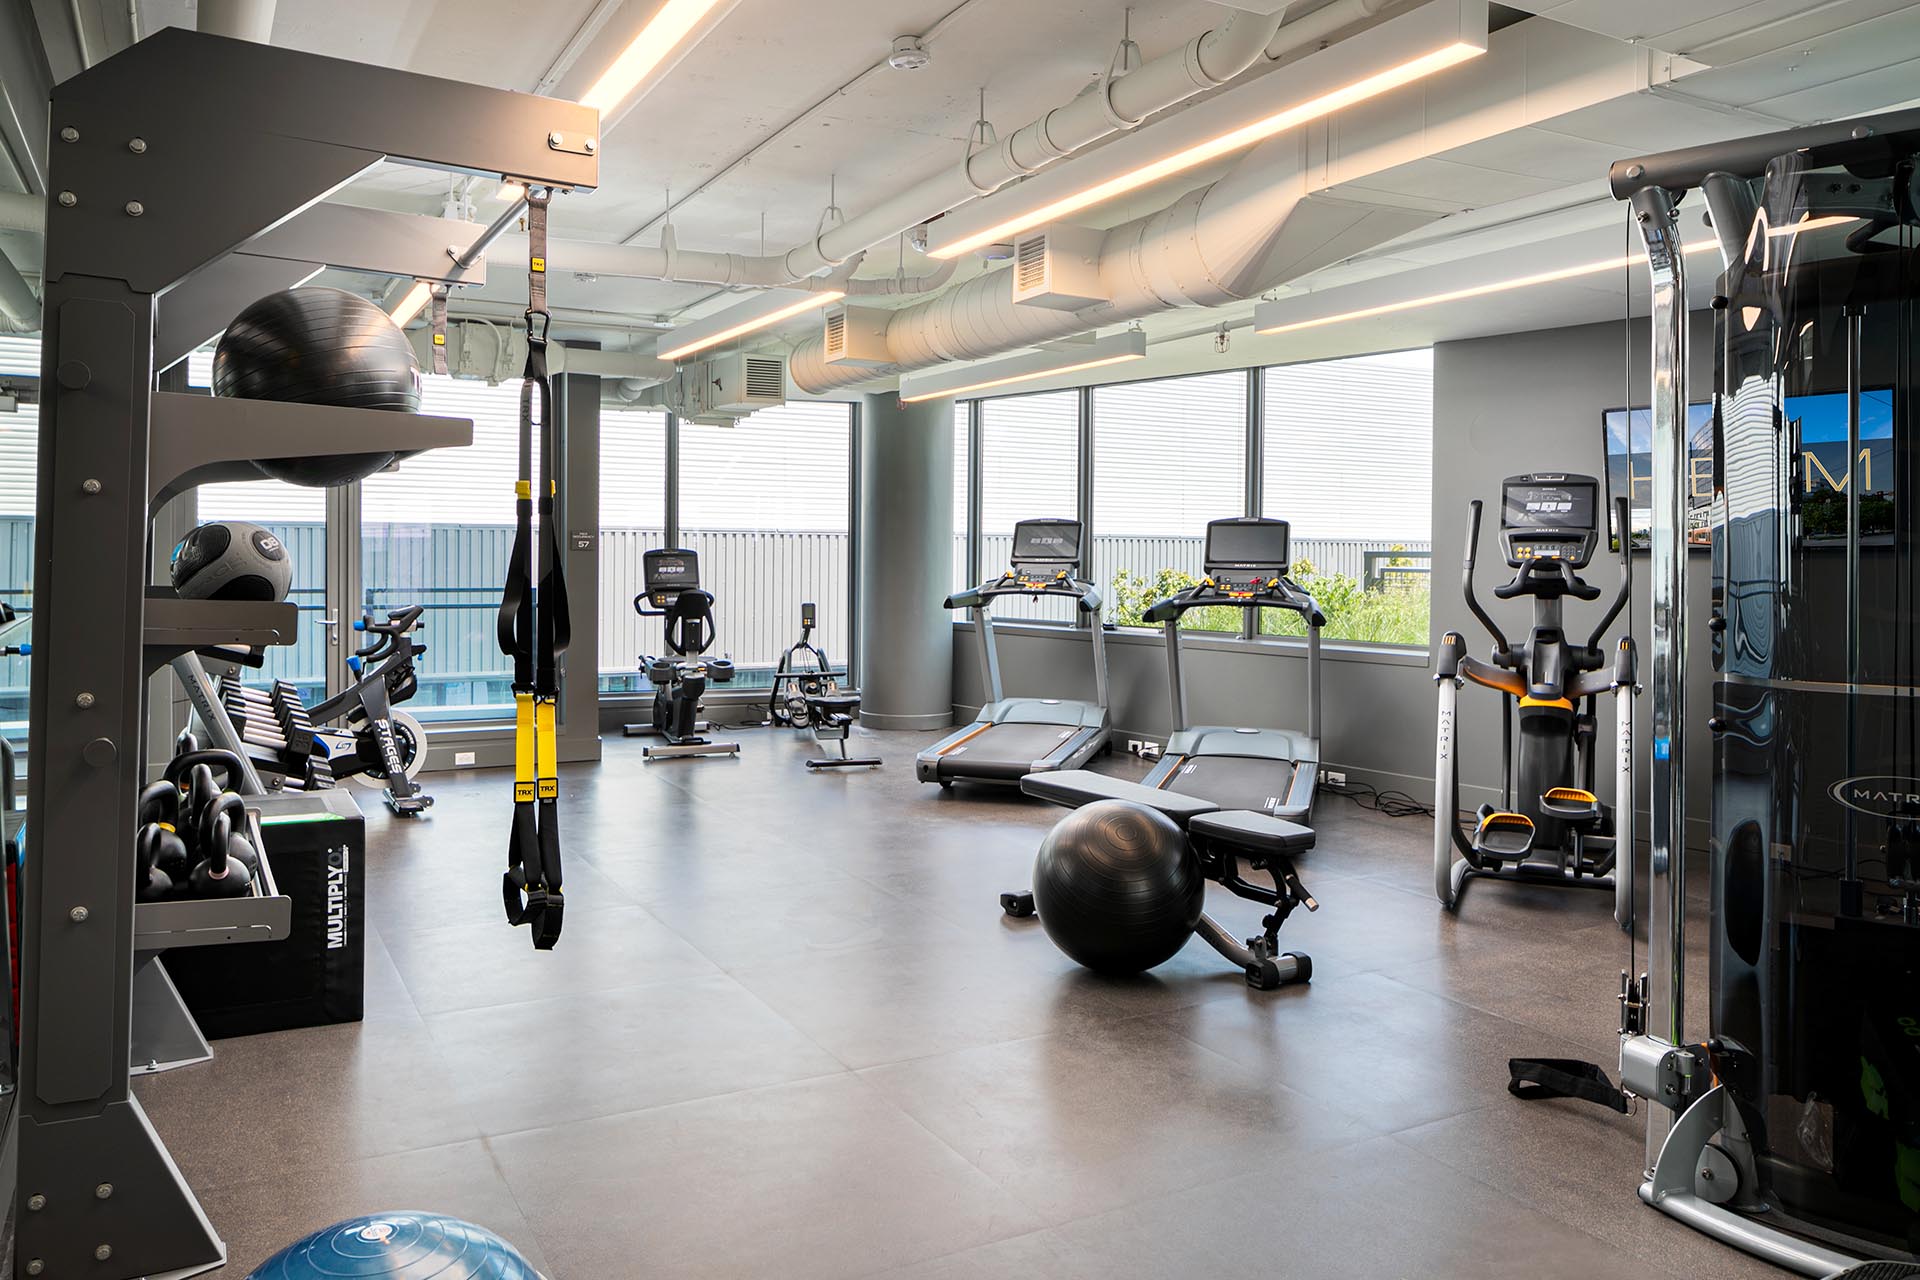 Open, light gym area with excercise equipment